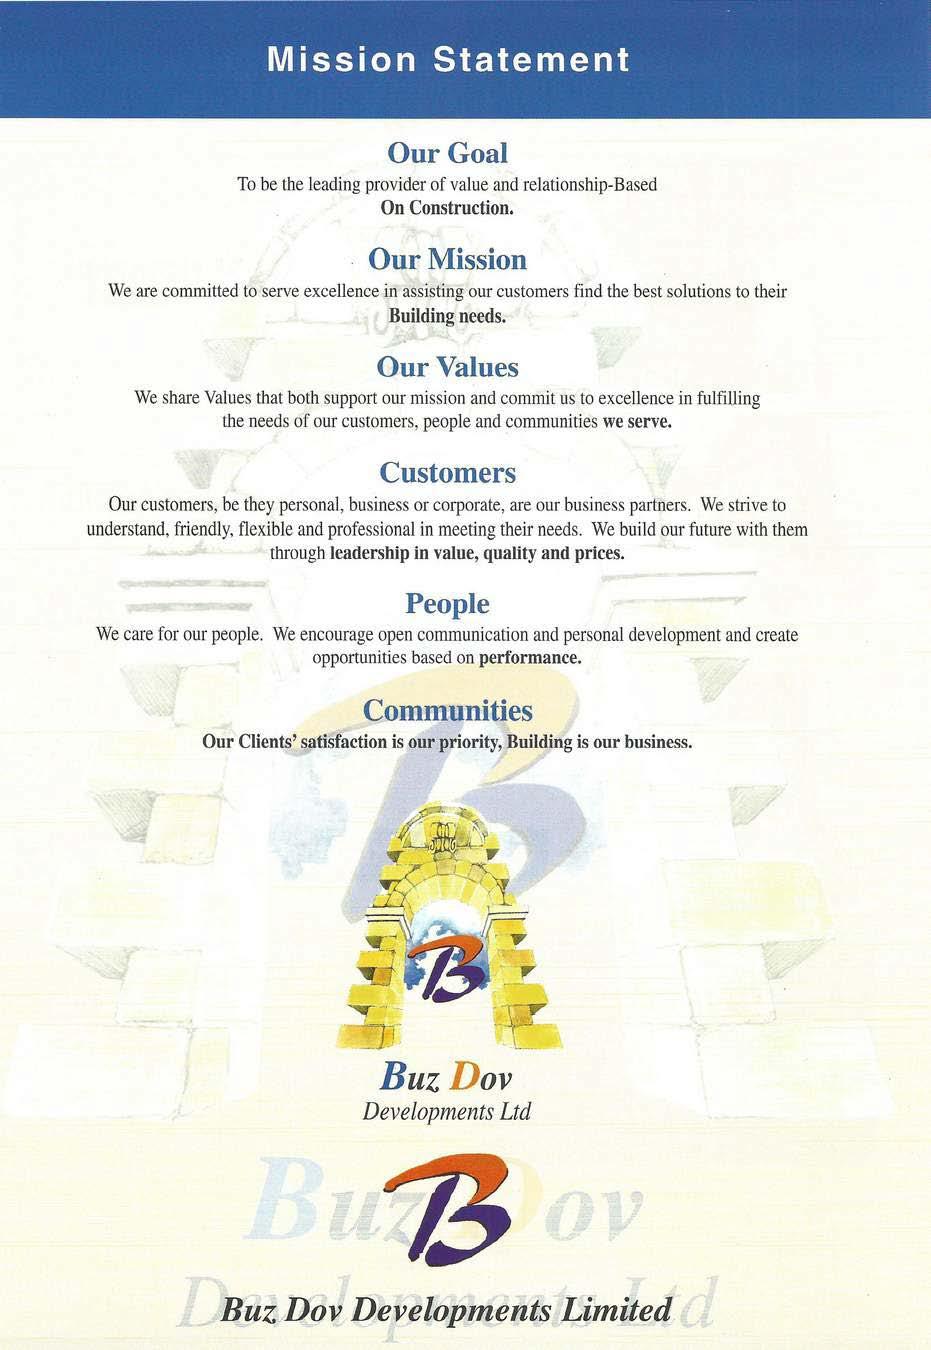 Our Goal To be tbe leading provider of value and relationship-based On Construction.